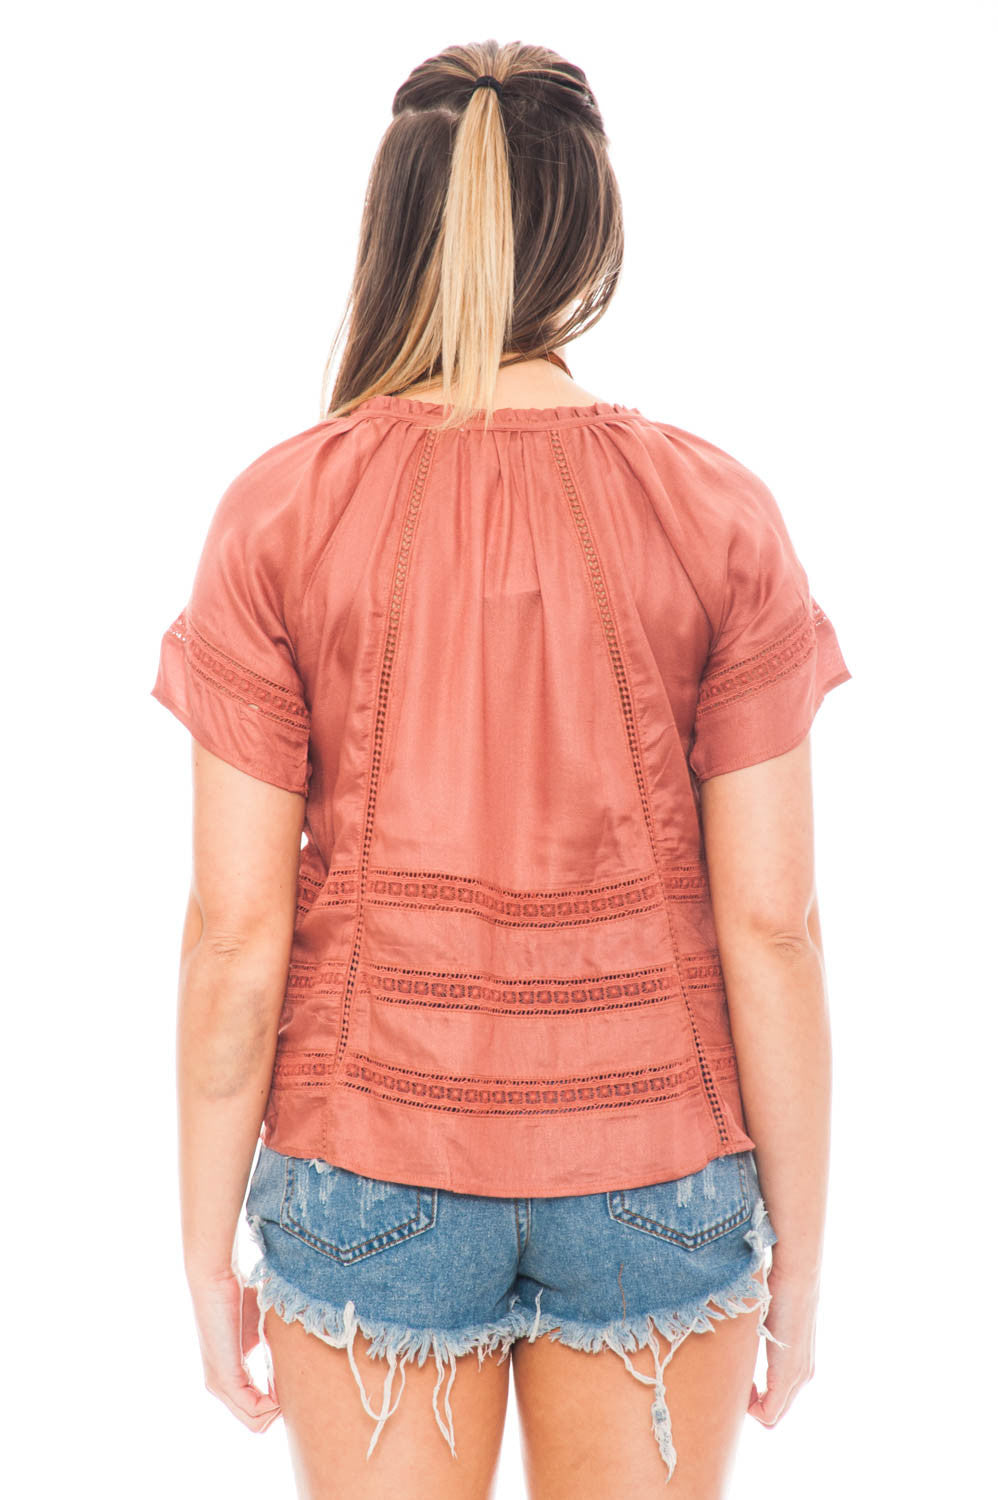 Blouse - Boho Woven Top with Tassels